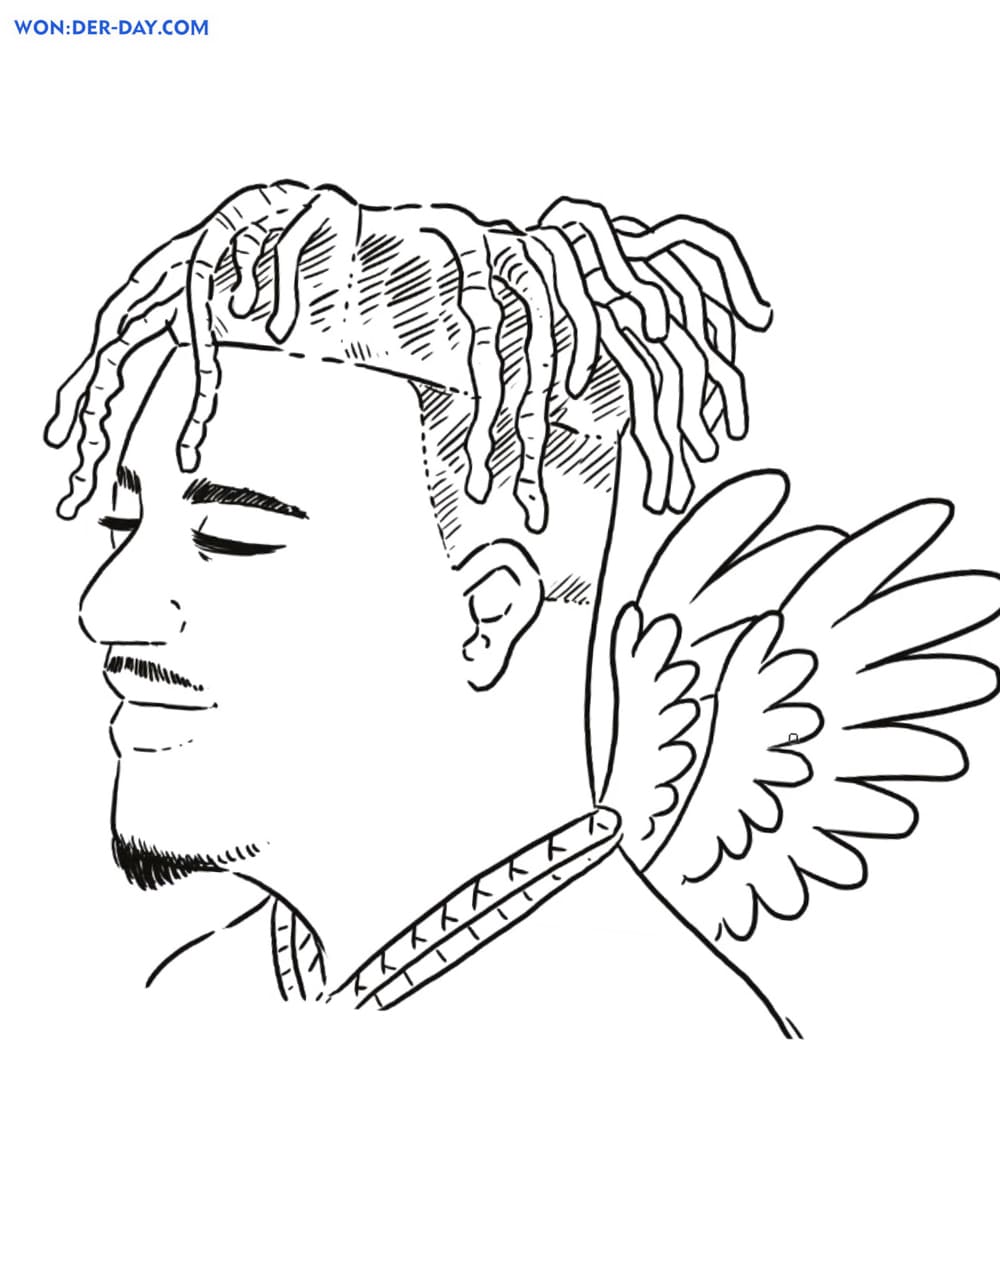 Juice WRLD Official Coloring Book